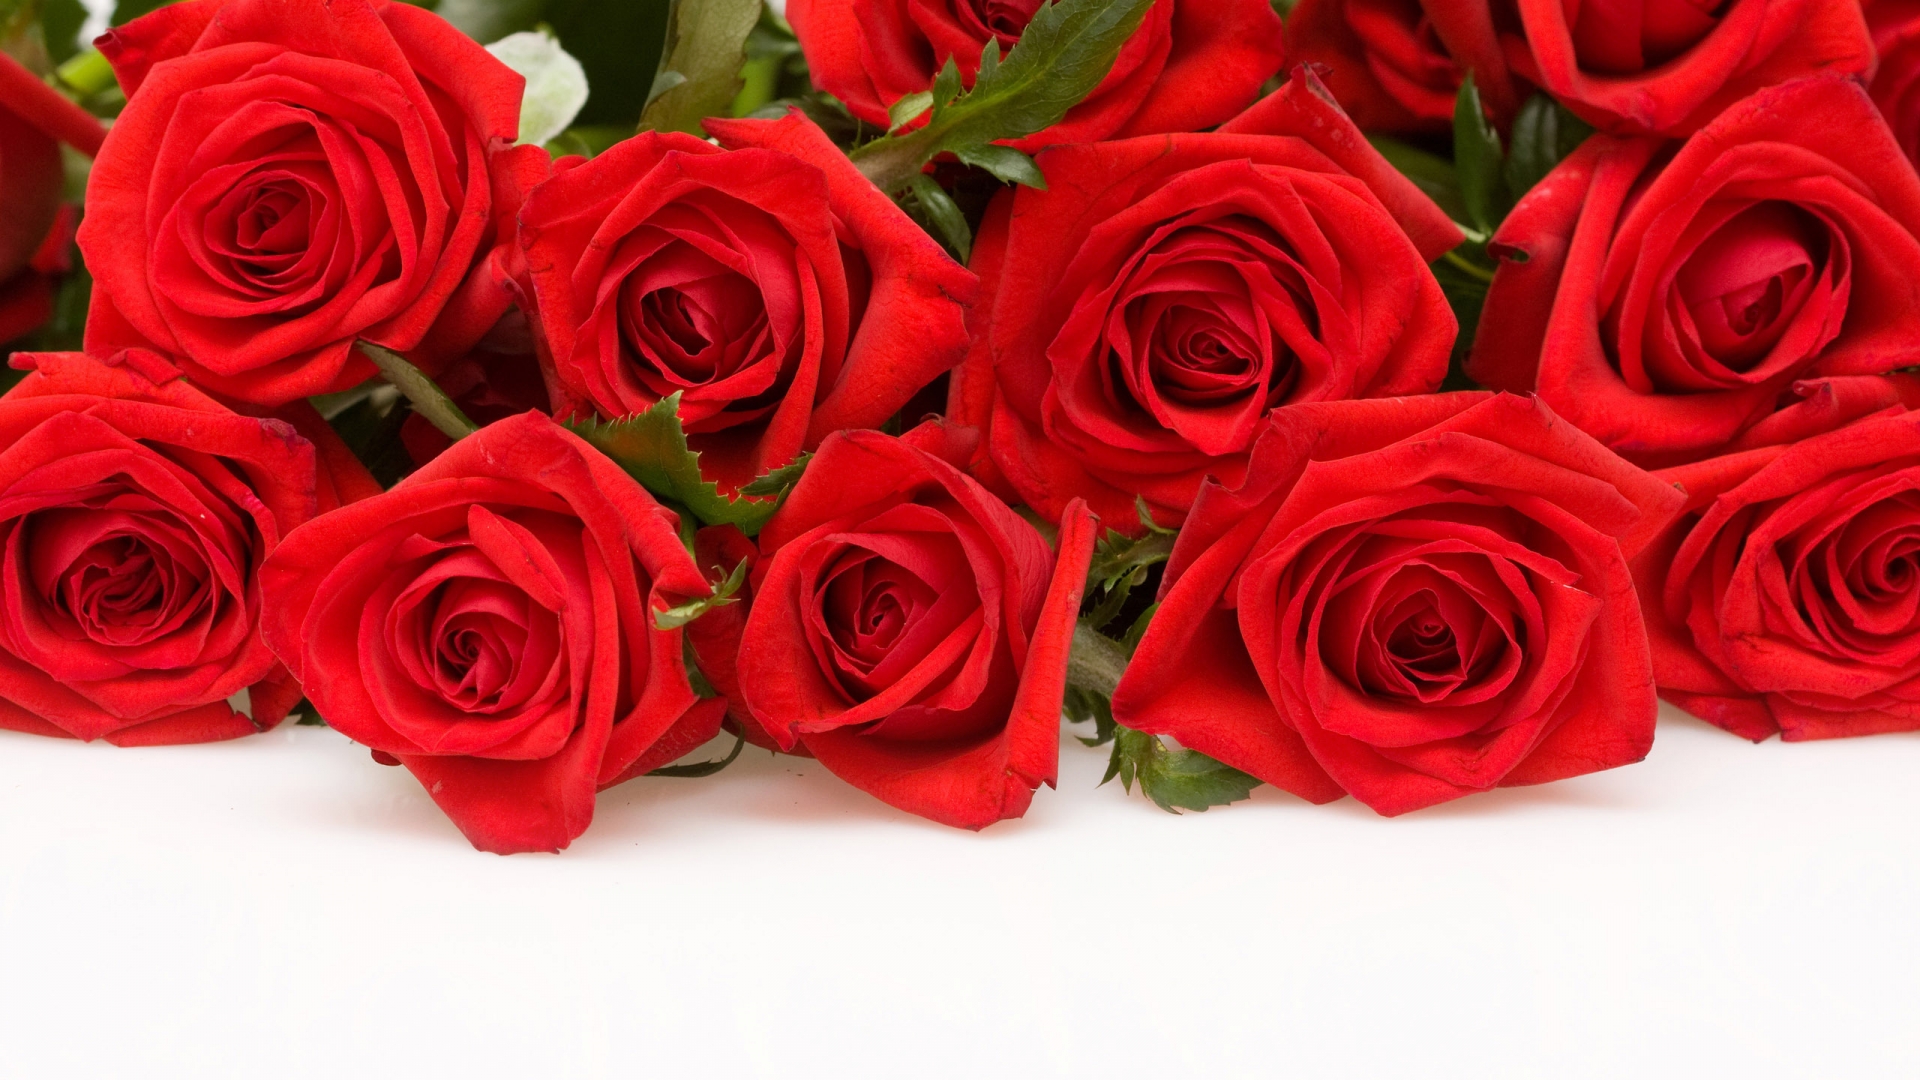 Red Rose Background Hd Pixlith